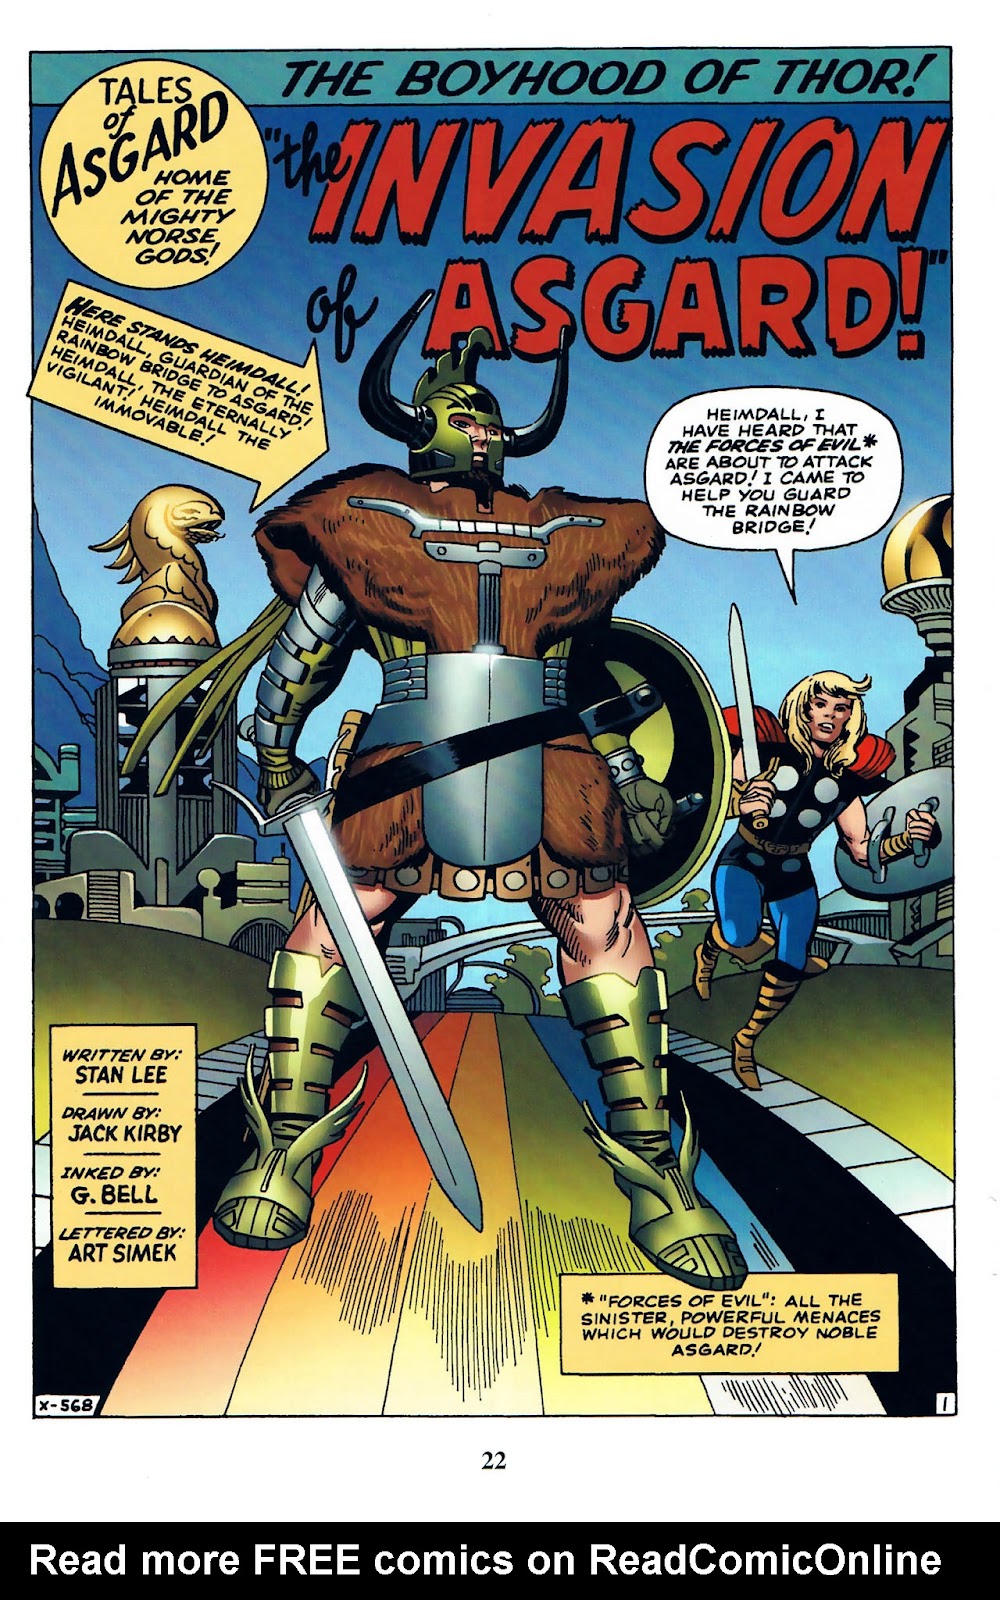 Thor: Tales of Asgard by Stan Lee & Jack Kirby issue 1 - Page 24